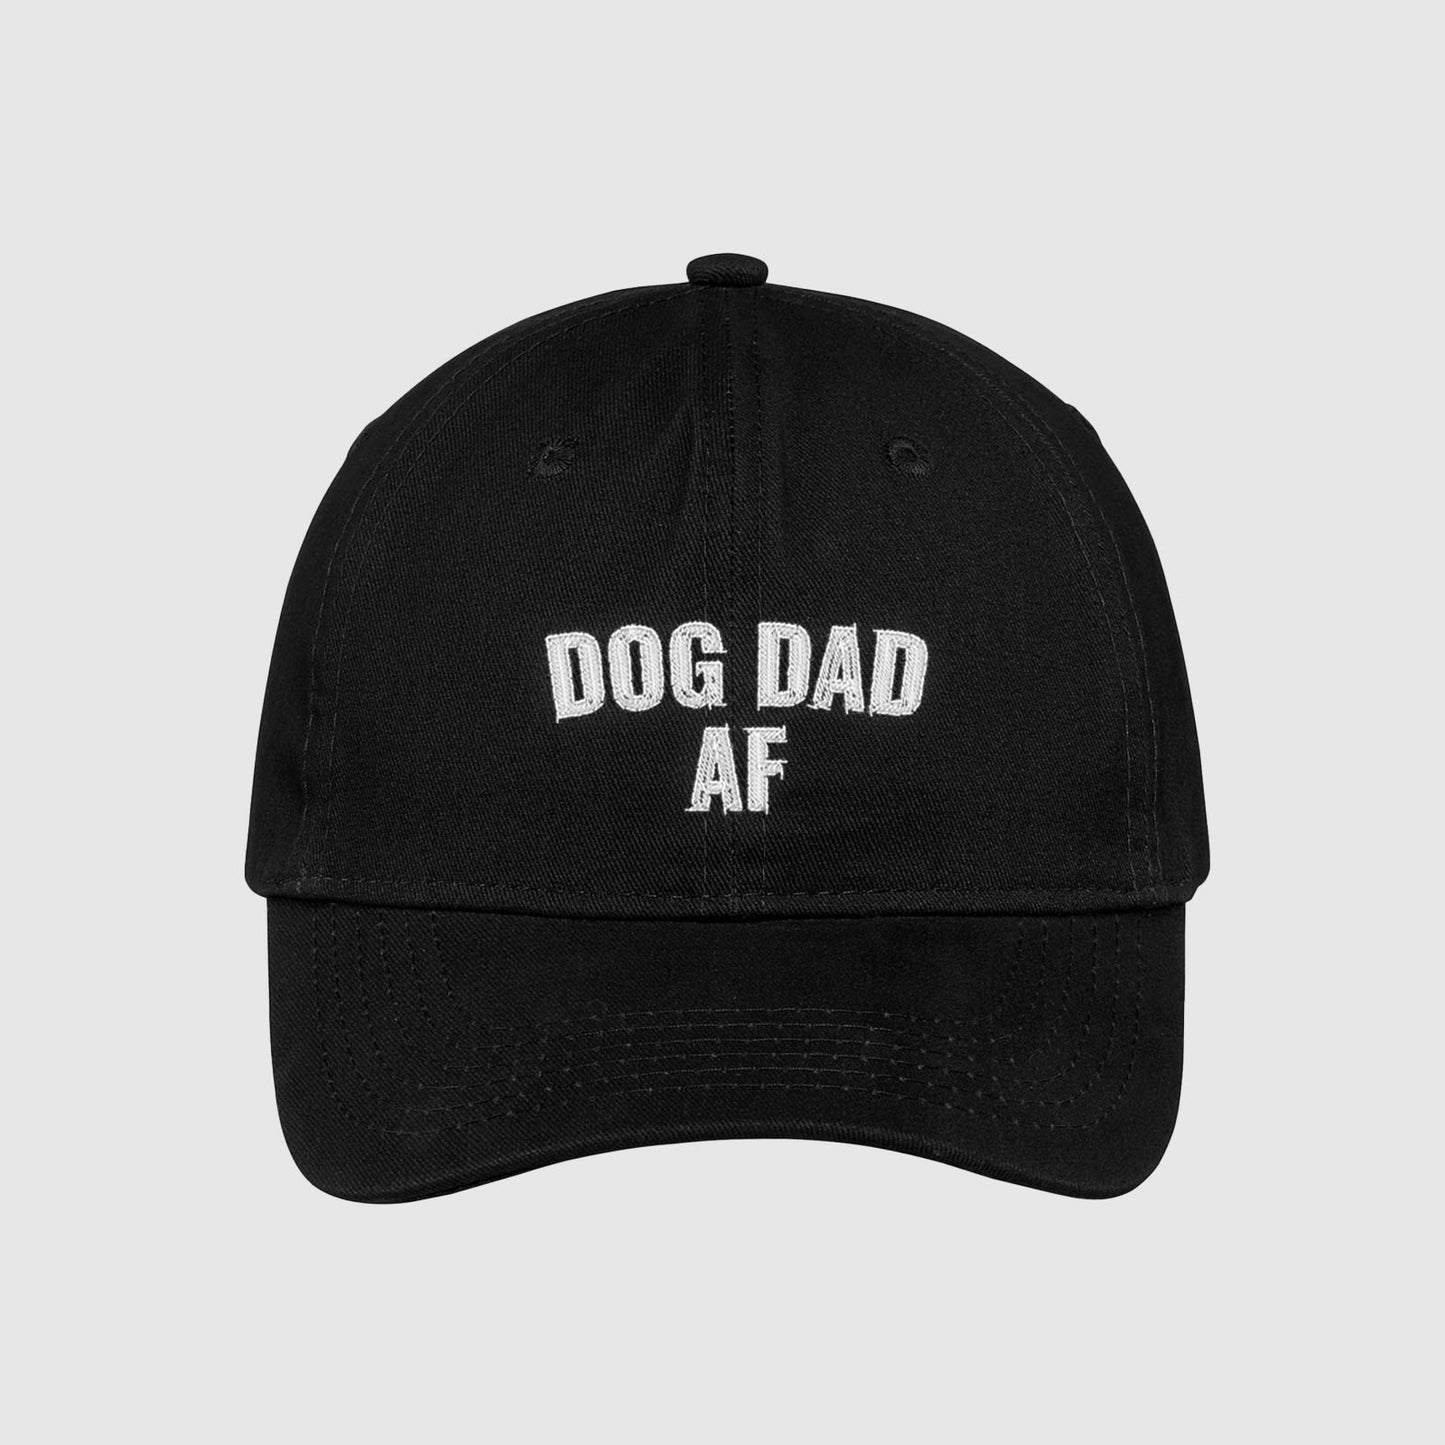 Black Dog Dad AF Hat embroidered with white text